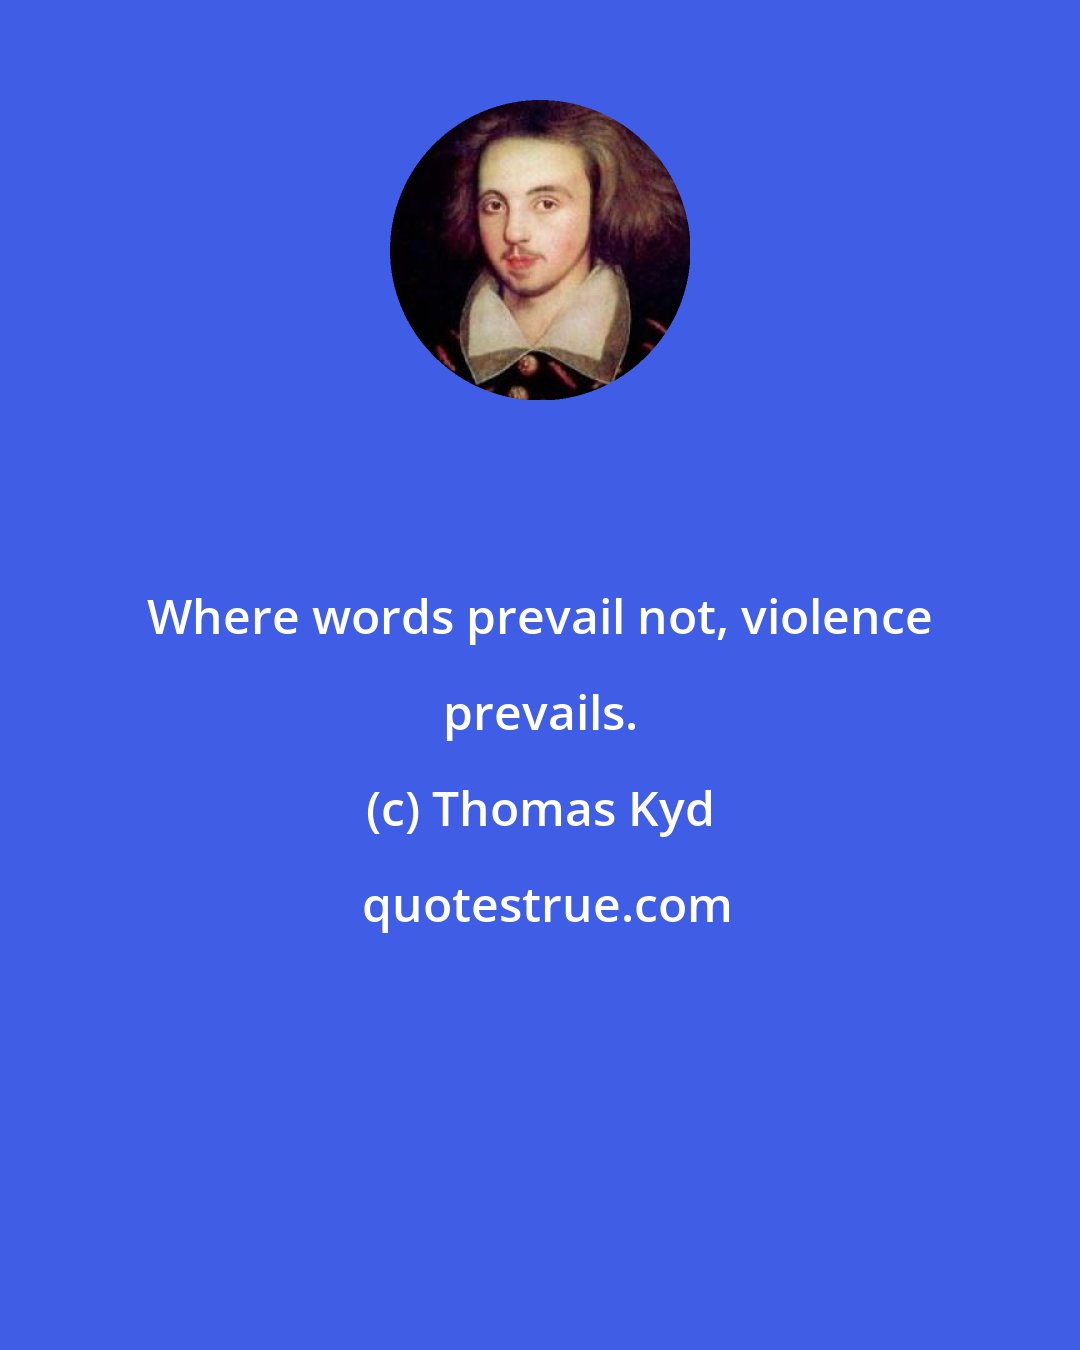 Thomas Kyd: Where words prevail not, violence prevails.